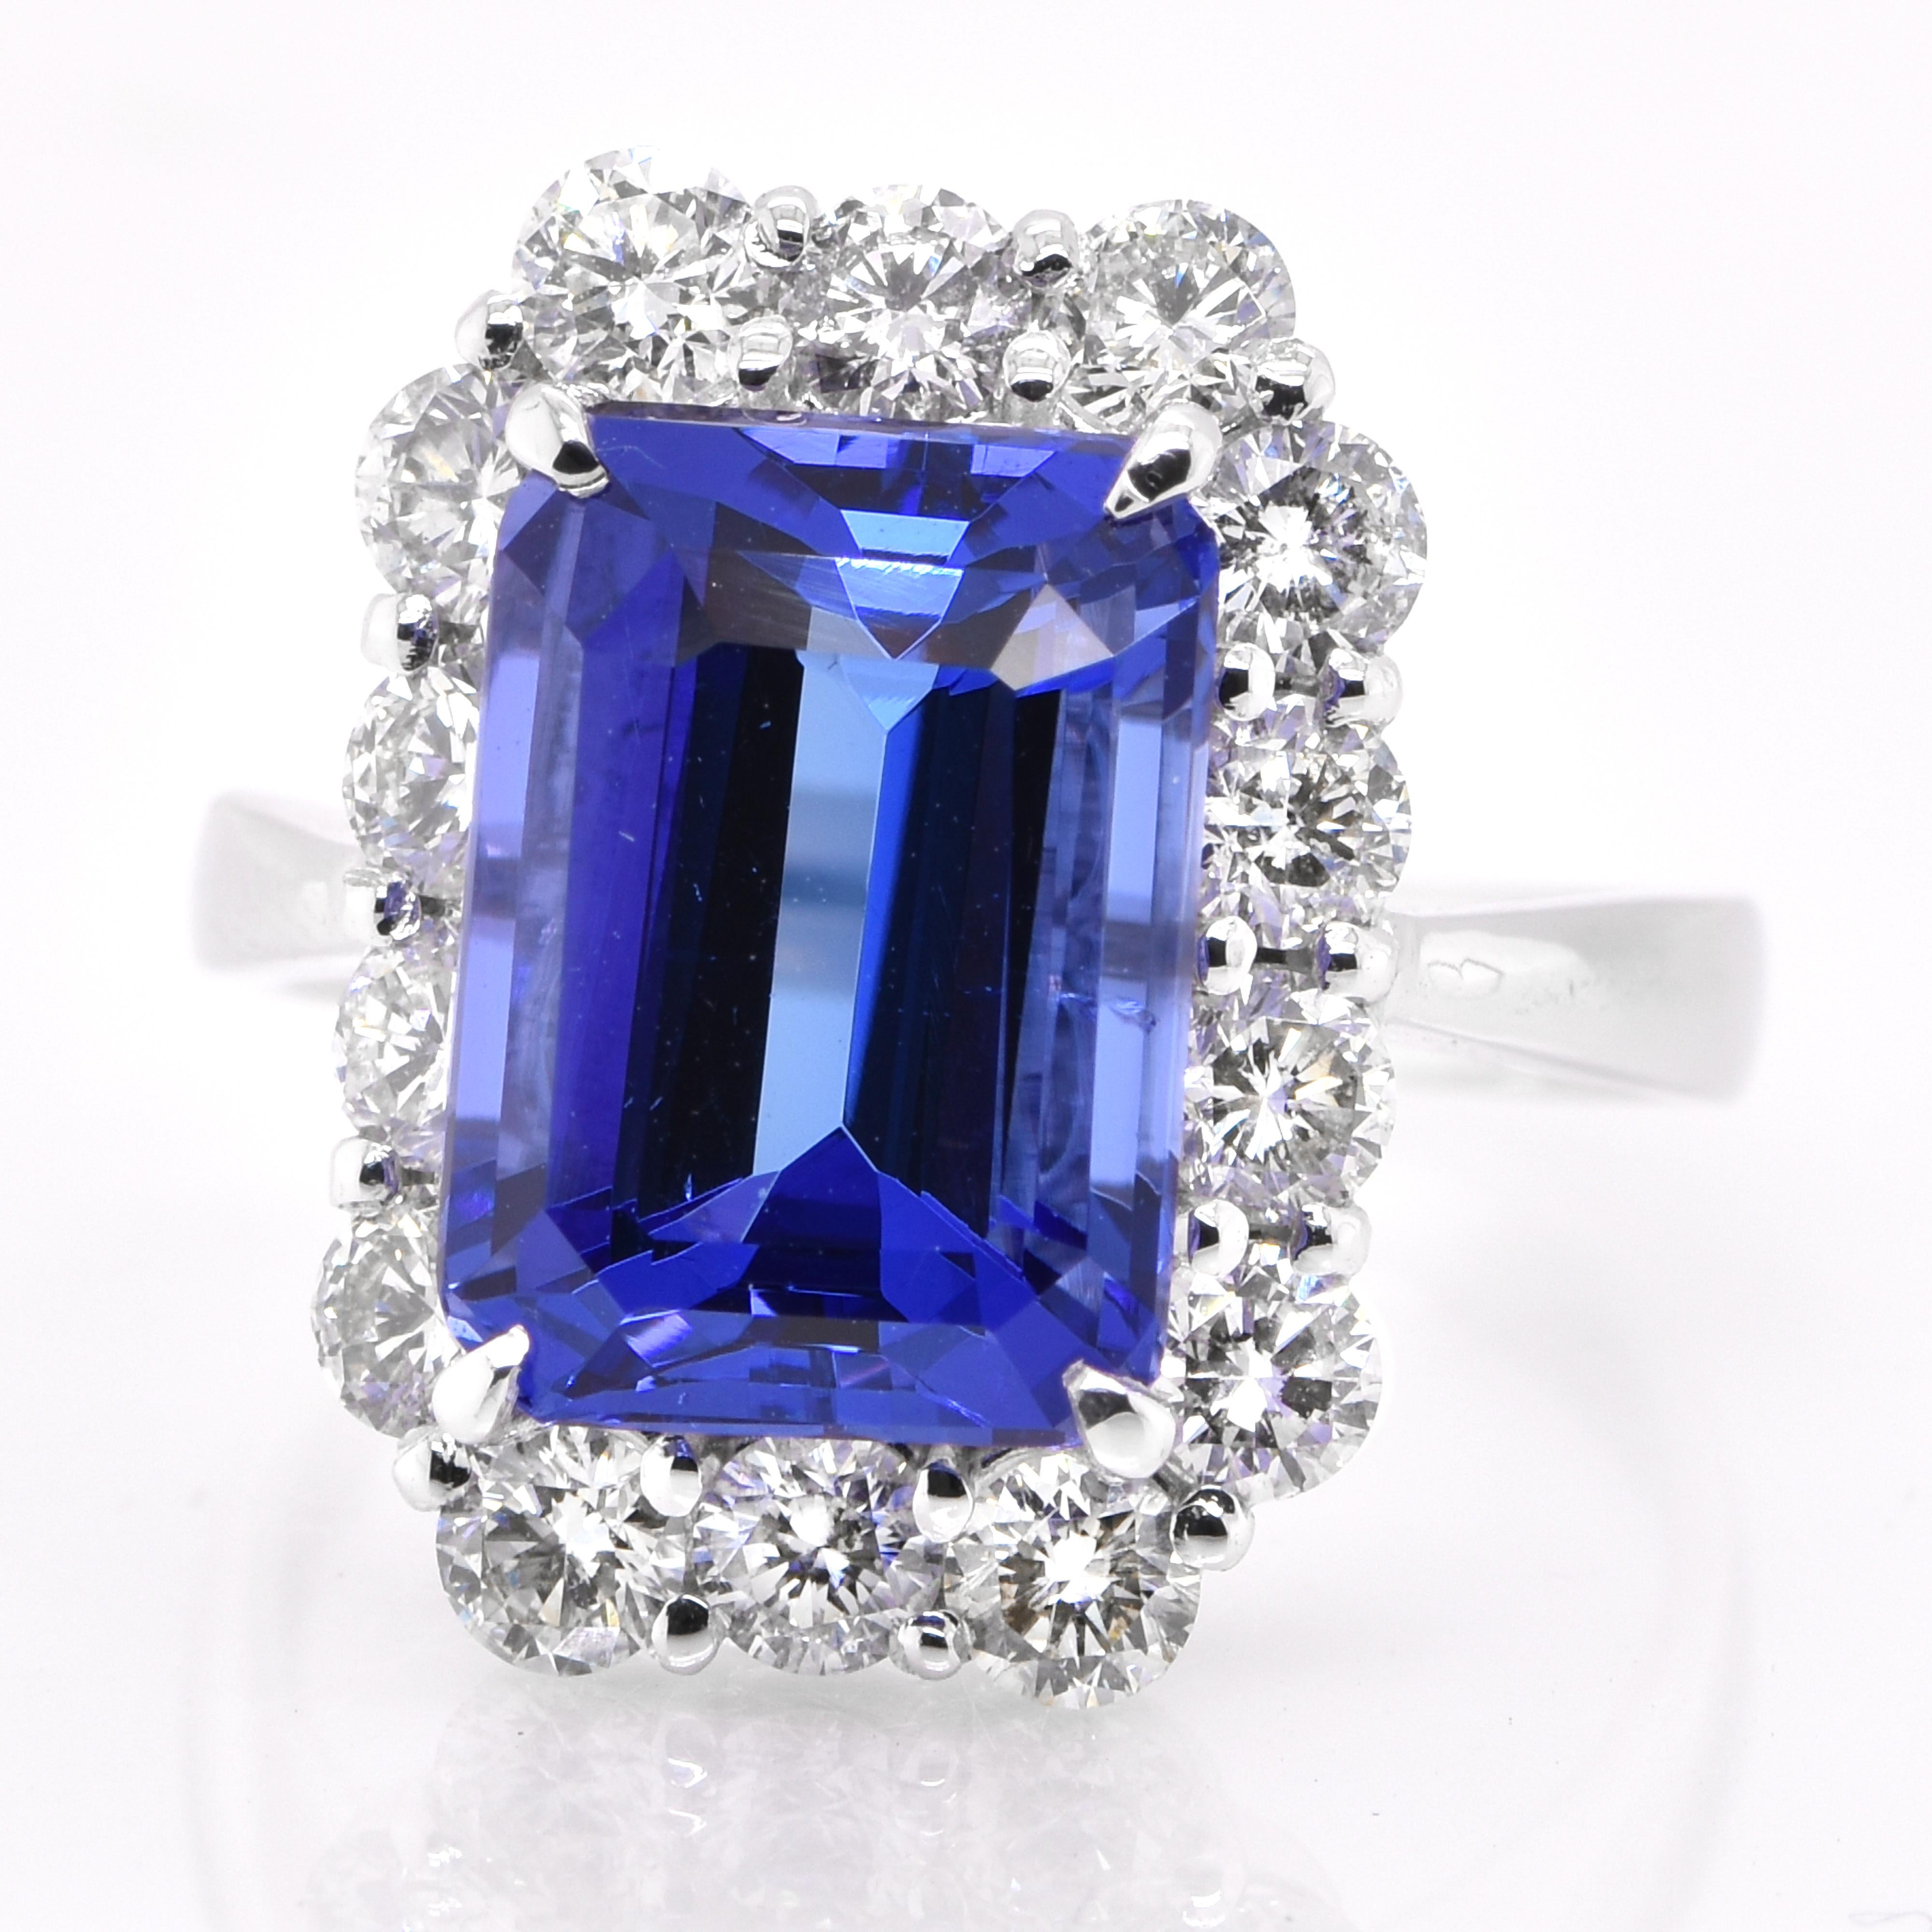 A beautiful ring featuring a 5.58 Carat Natural Tanzanite and 1.39 Carats Diamond Accents set in Platinum. Tanzanite's name was given by Tiffany and Co after its only known source: Tanzania. Tanzanite displays beautiful pleochroic colors meaning